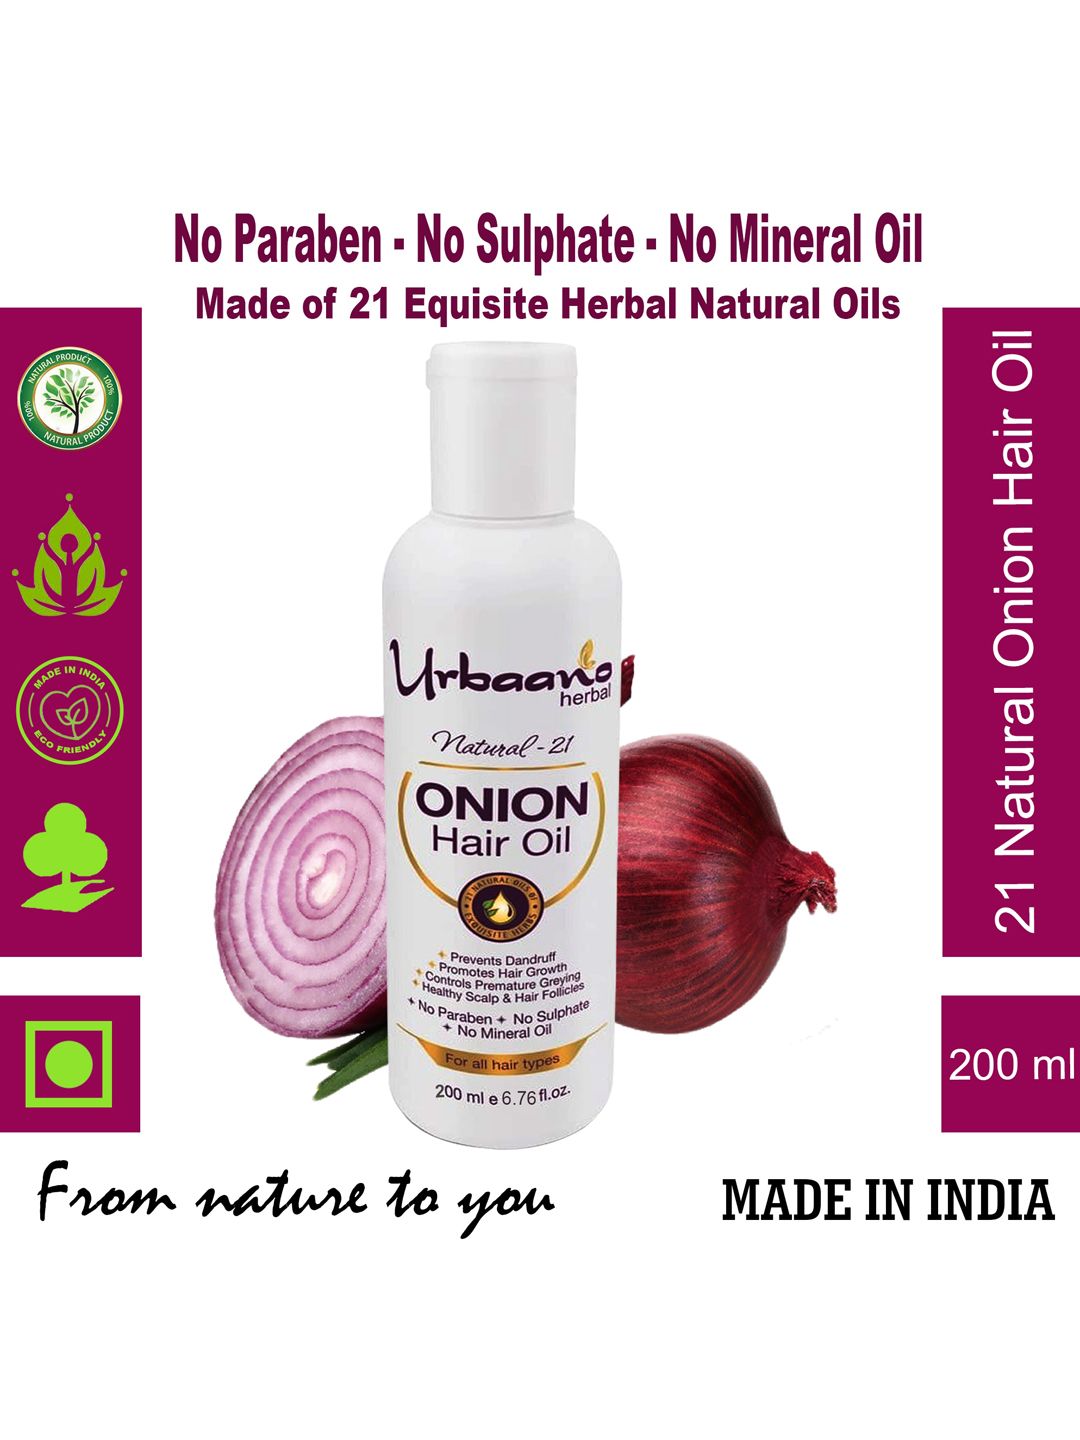 Urbaano Herbal Natural 21 Red Onion Hair Oil 200ml Price in India